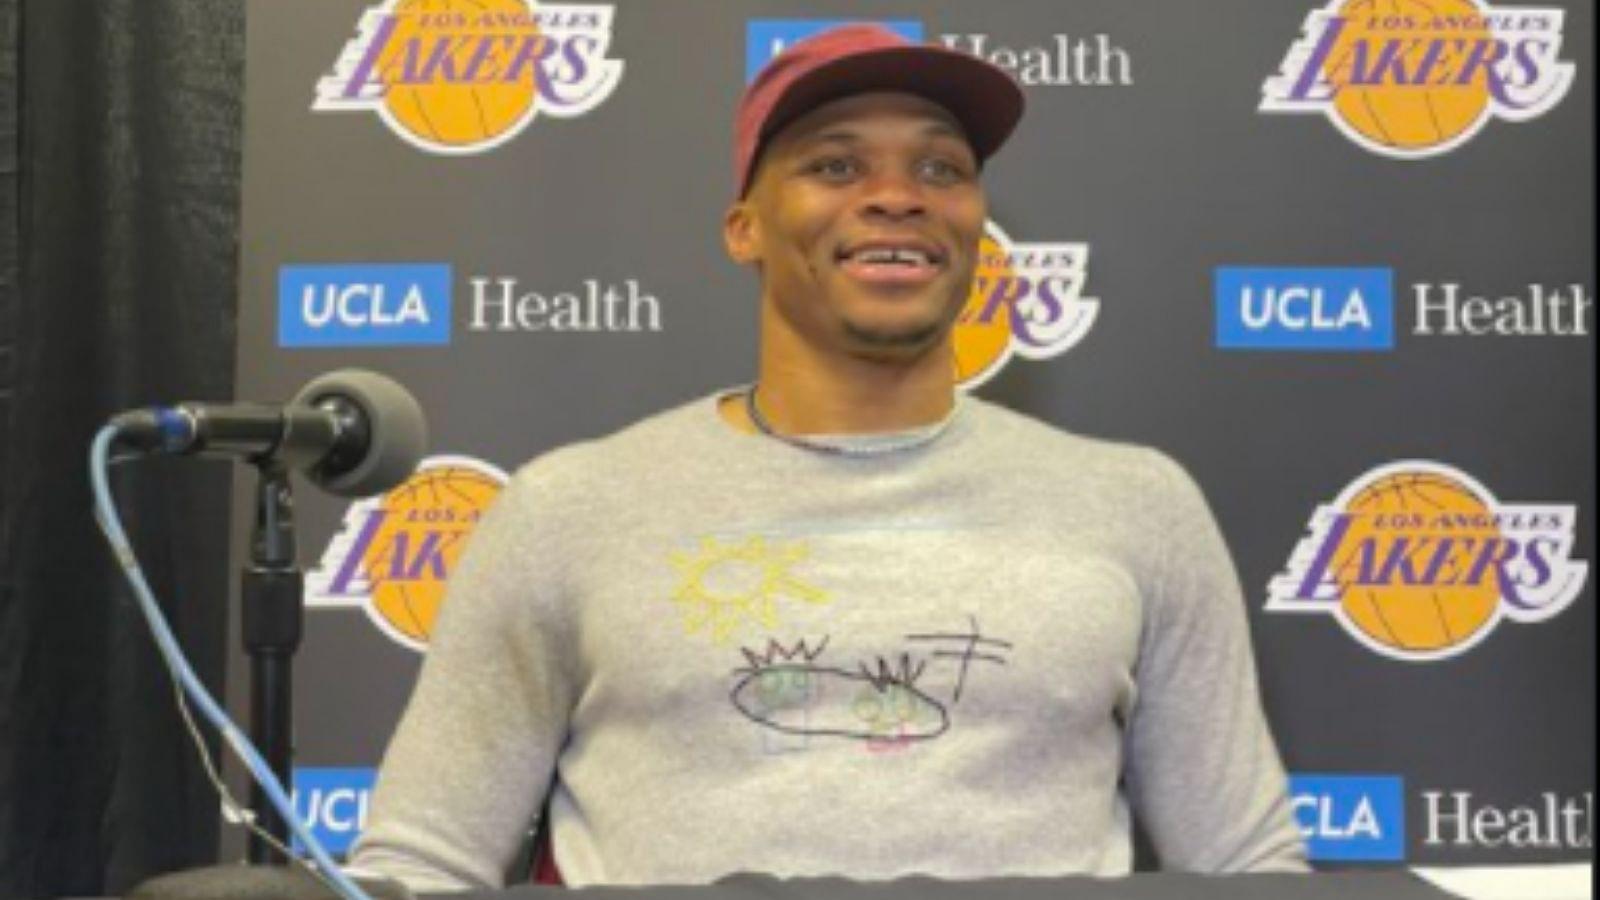 "Russell Westbrook, Father extraordinaire!" : The Lakers point guard cannot stop glowing about wearing his son's design on his sweater during his press conference